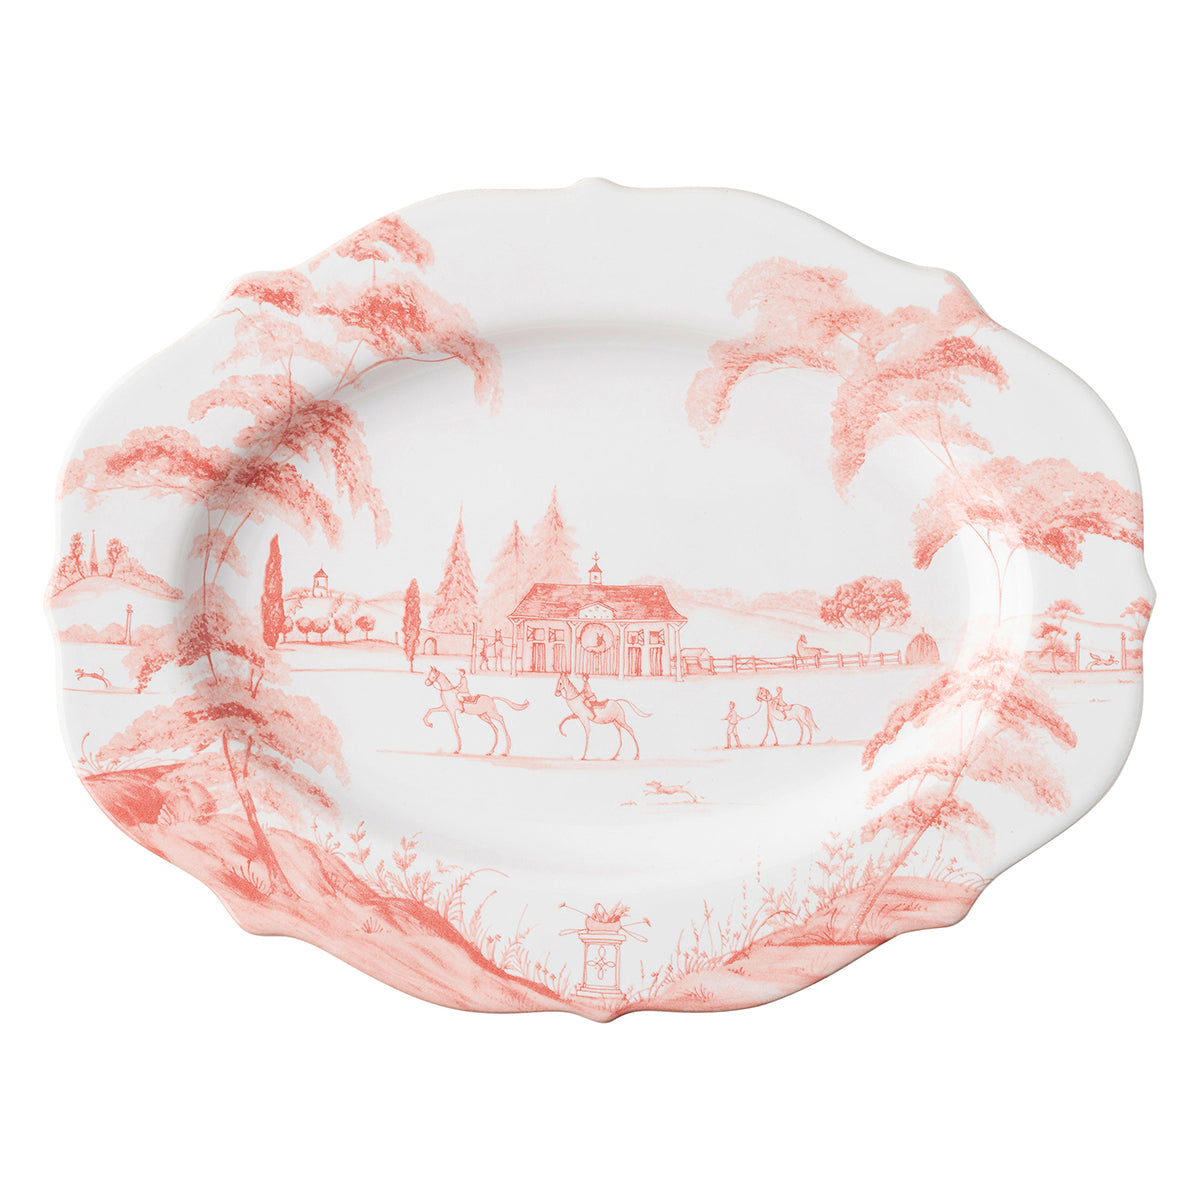 Country Estate 15in Platter - Petal Pink-2nd